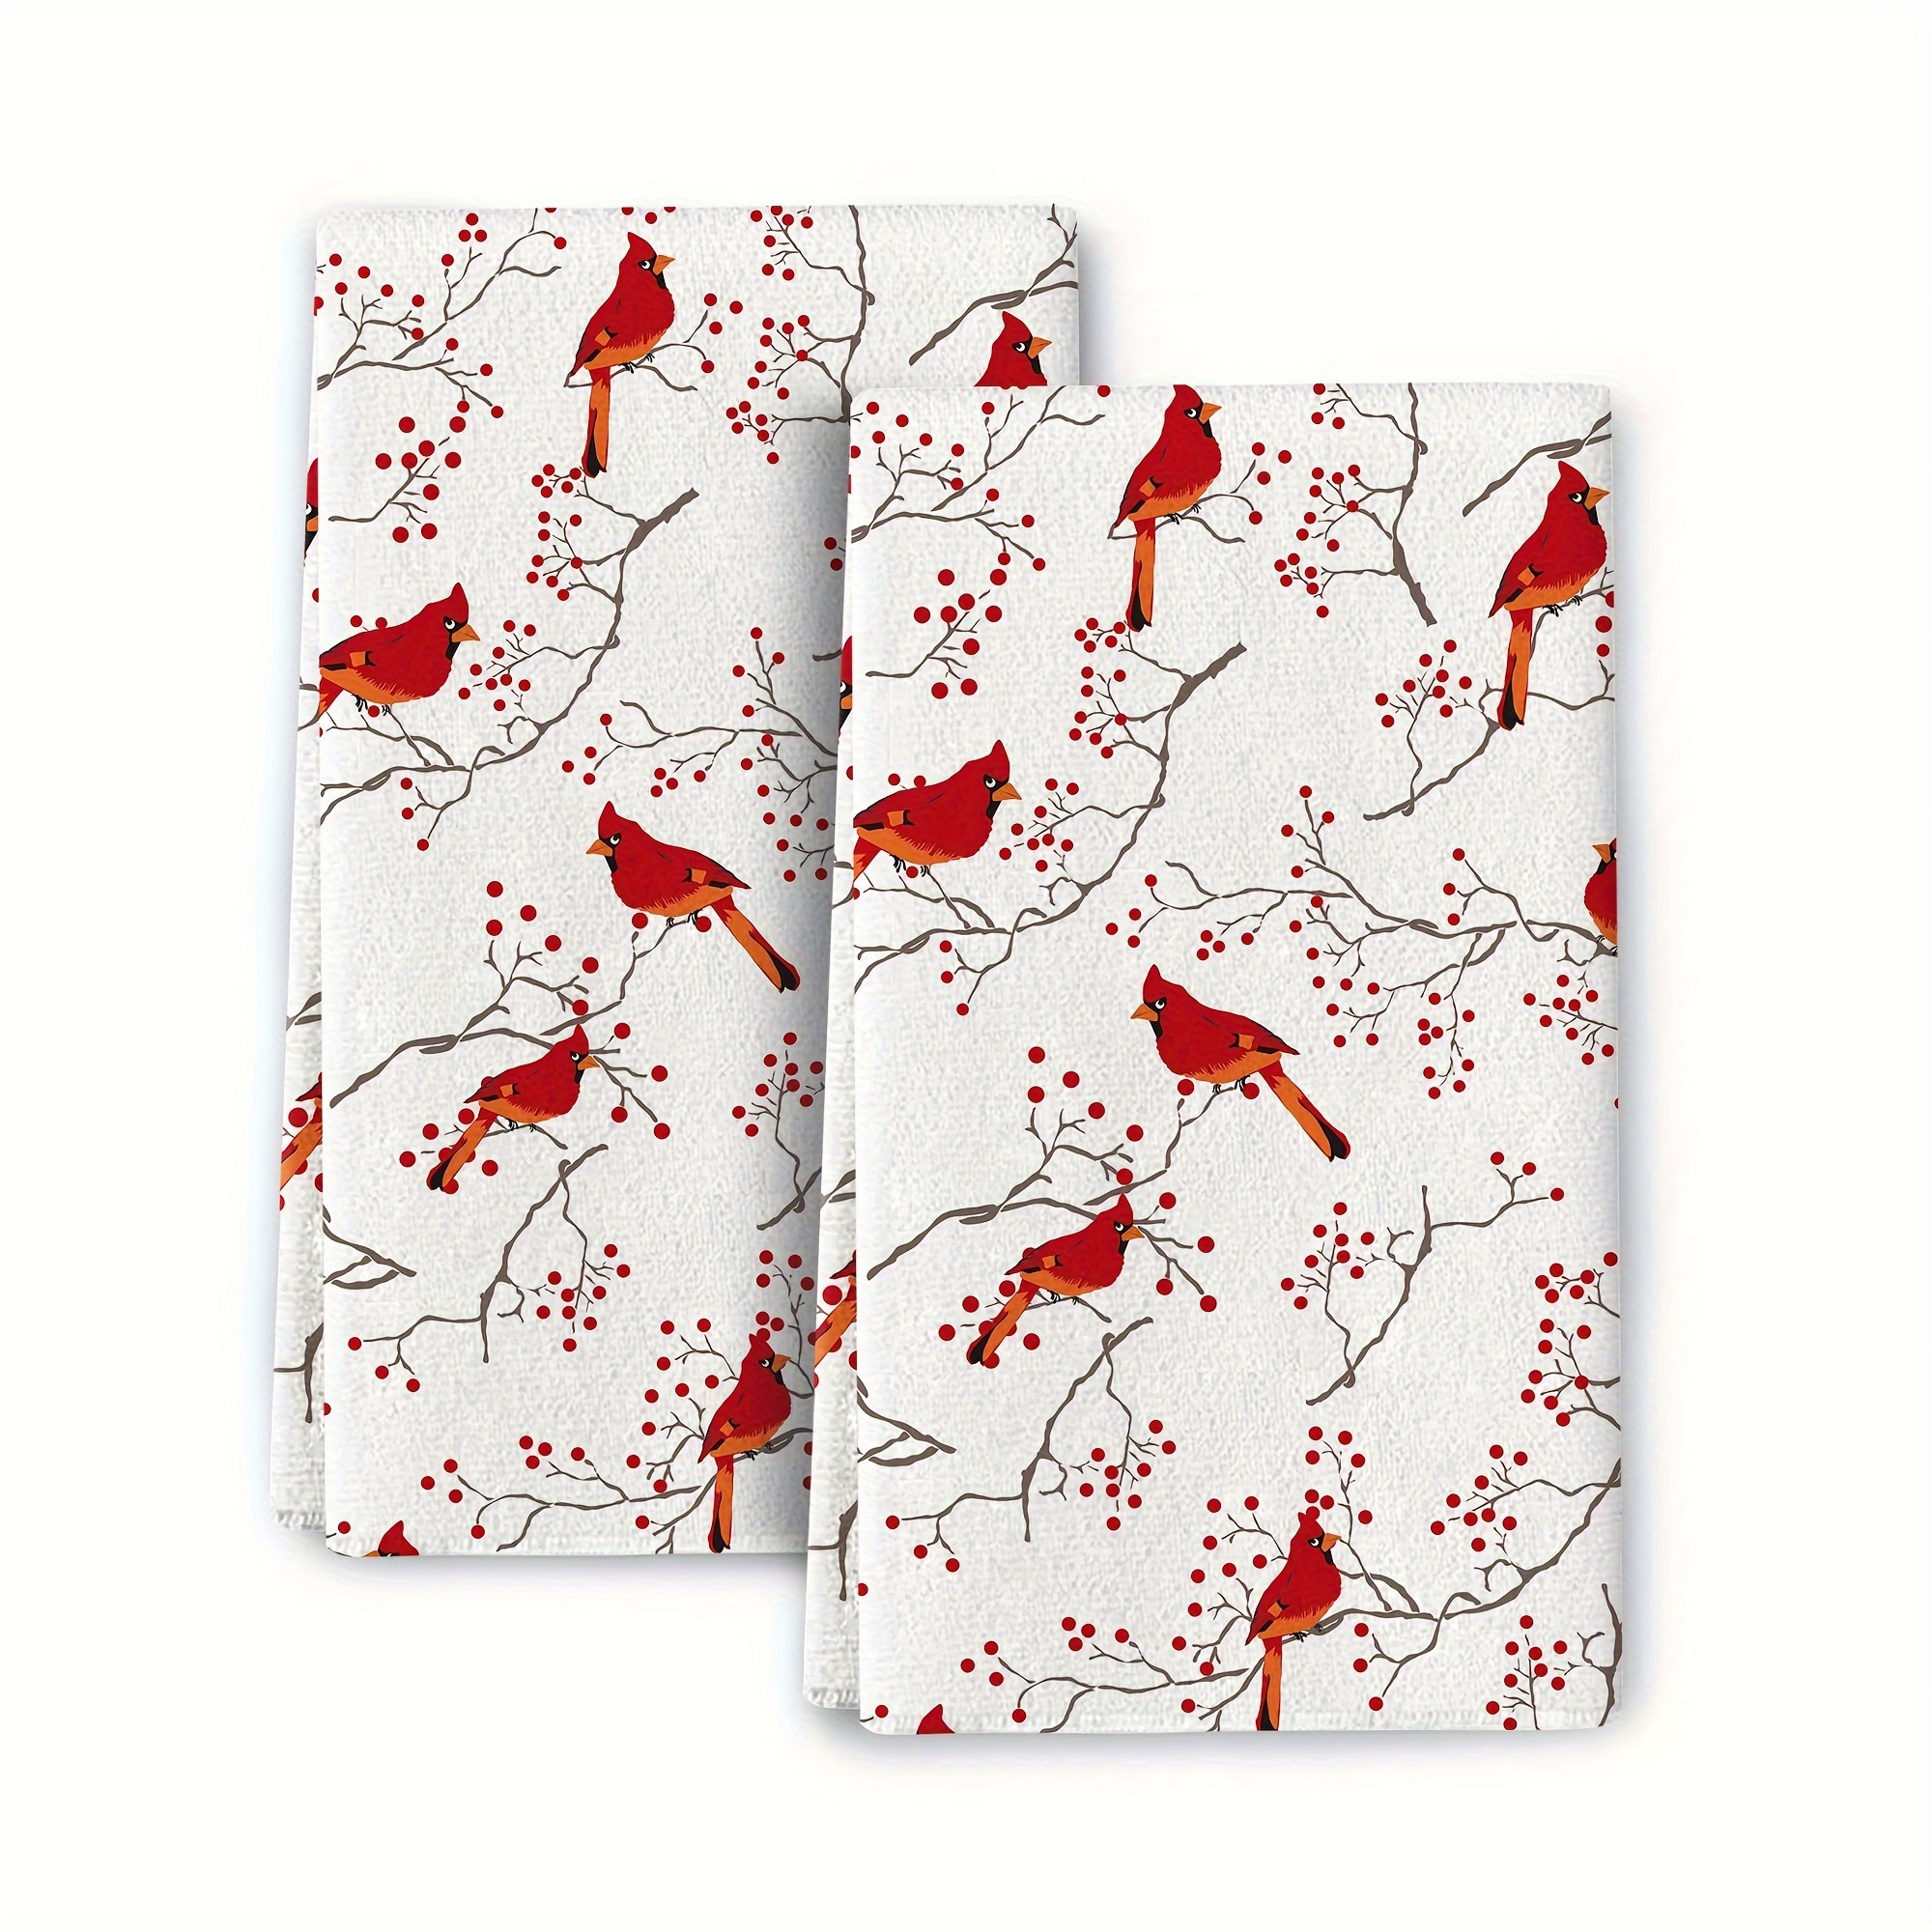 

2ppcs, Hand Towel, Red Bird And Cranberry Christmas Hand Towel, Multi-purpose Kitchen Soft Absorbent Towel, Dish Cloth, Washing Pad, Suitable For Home, Hotel, Spa Washing Cloth, Kitchen Cleaning